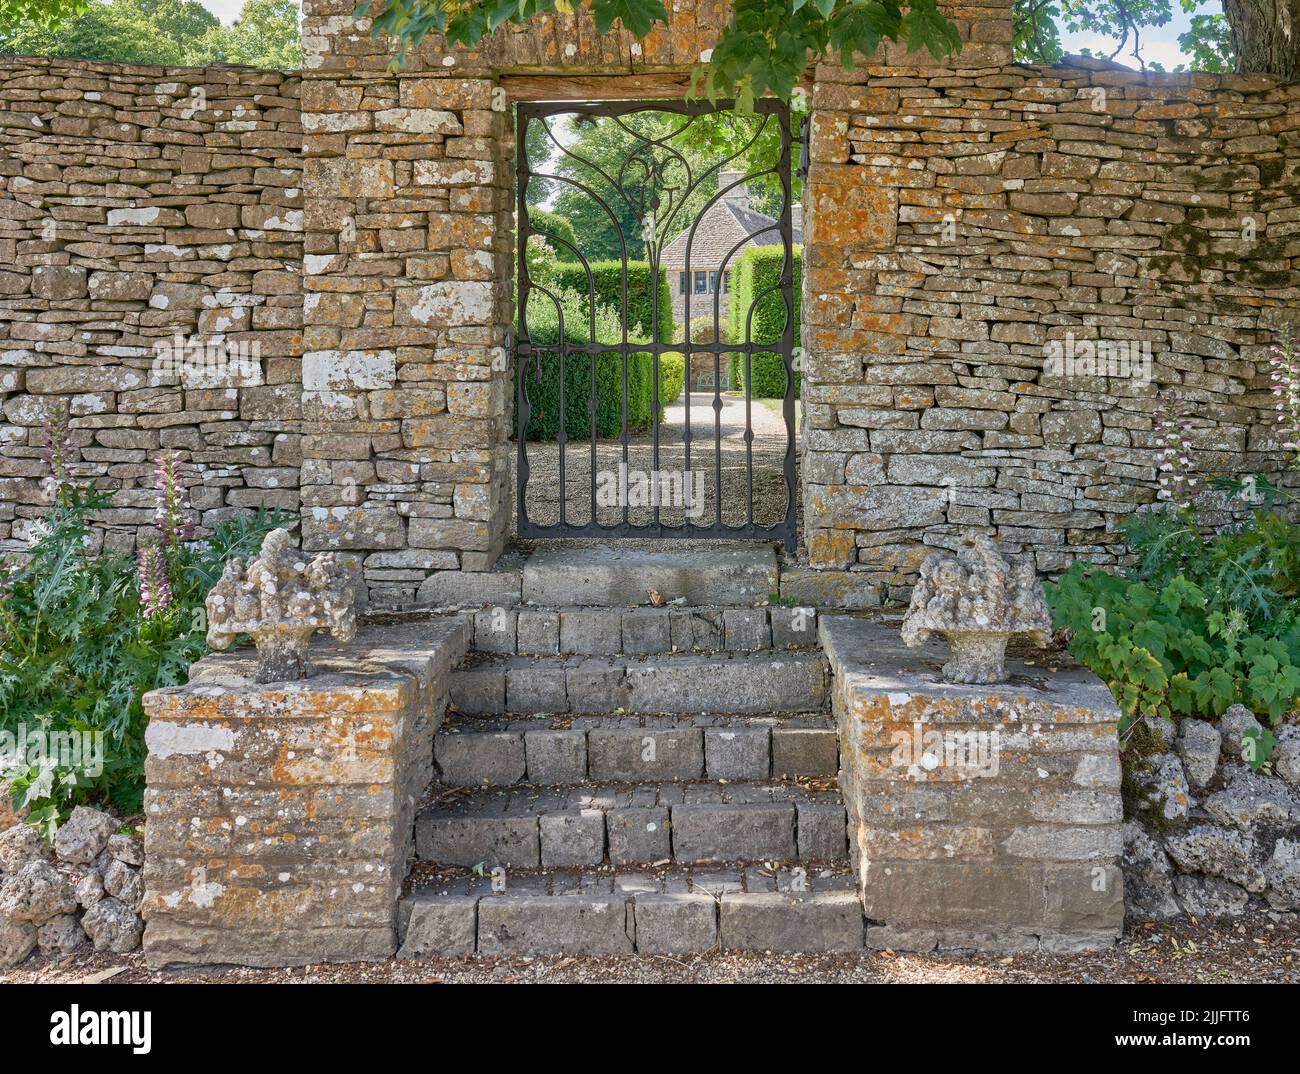 Stone steps leading to a wrought Iron garden gate in a traditional cotswold stone garden wall Stock Photo